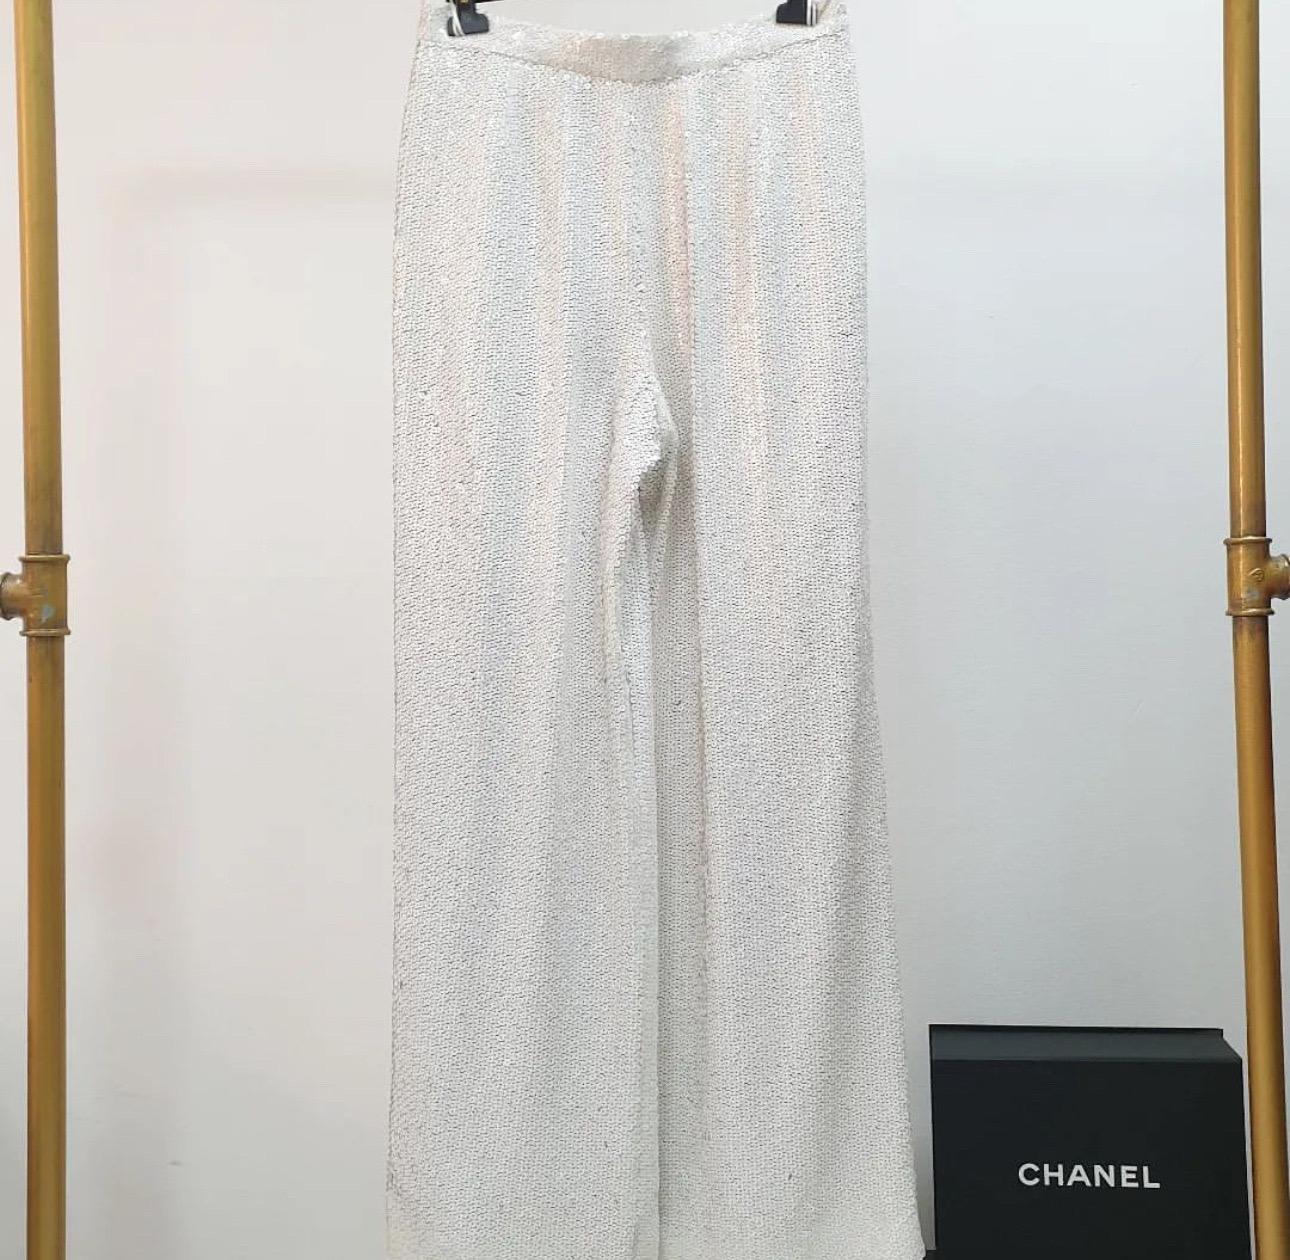 Gorgeous Chanel white sequin embellished pants as seen on MET GALA on Kirsten Stewart. 
From Runway of 2019 Fall ''In The Snow'' Collection by Kalr Lagerfeld. 
Similiar pants in current Collection go with price over 6,500 pounds


Size 44


Very